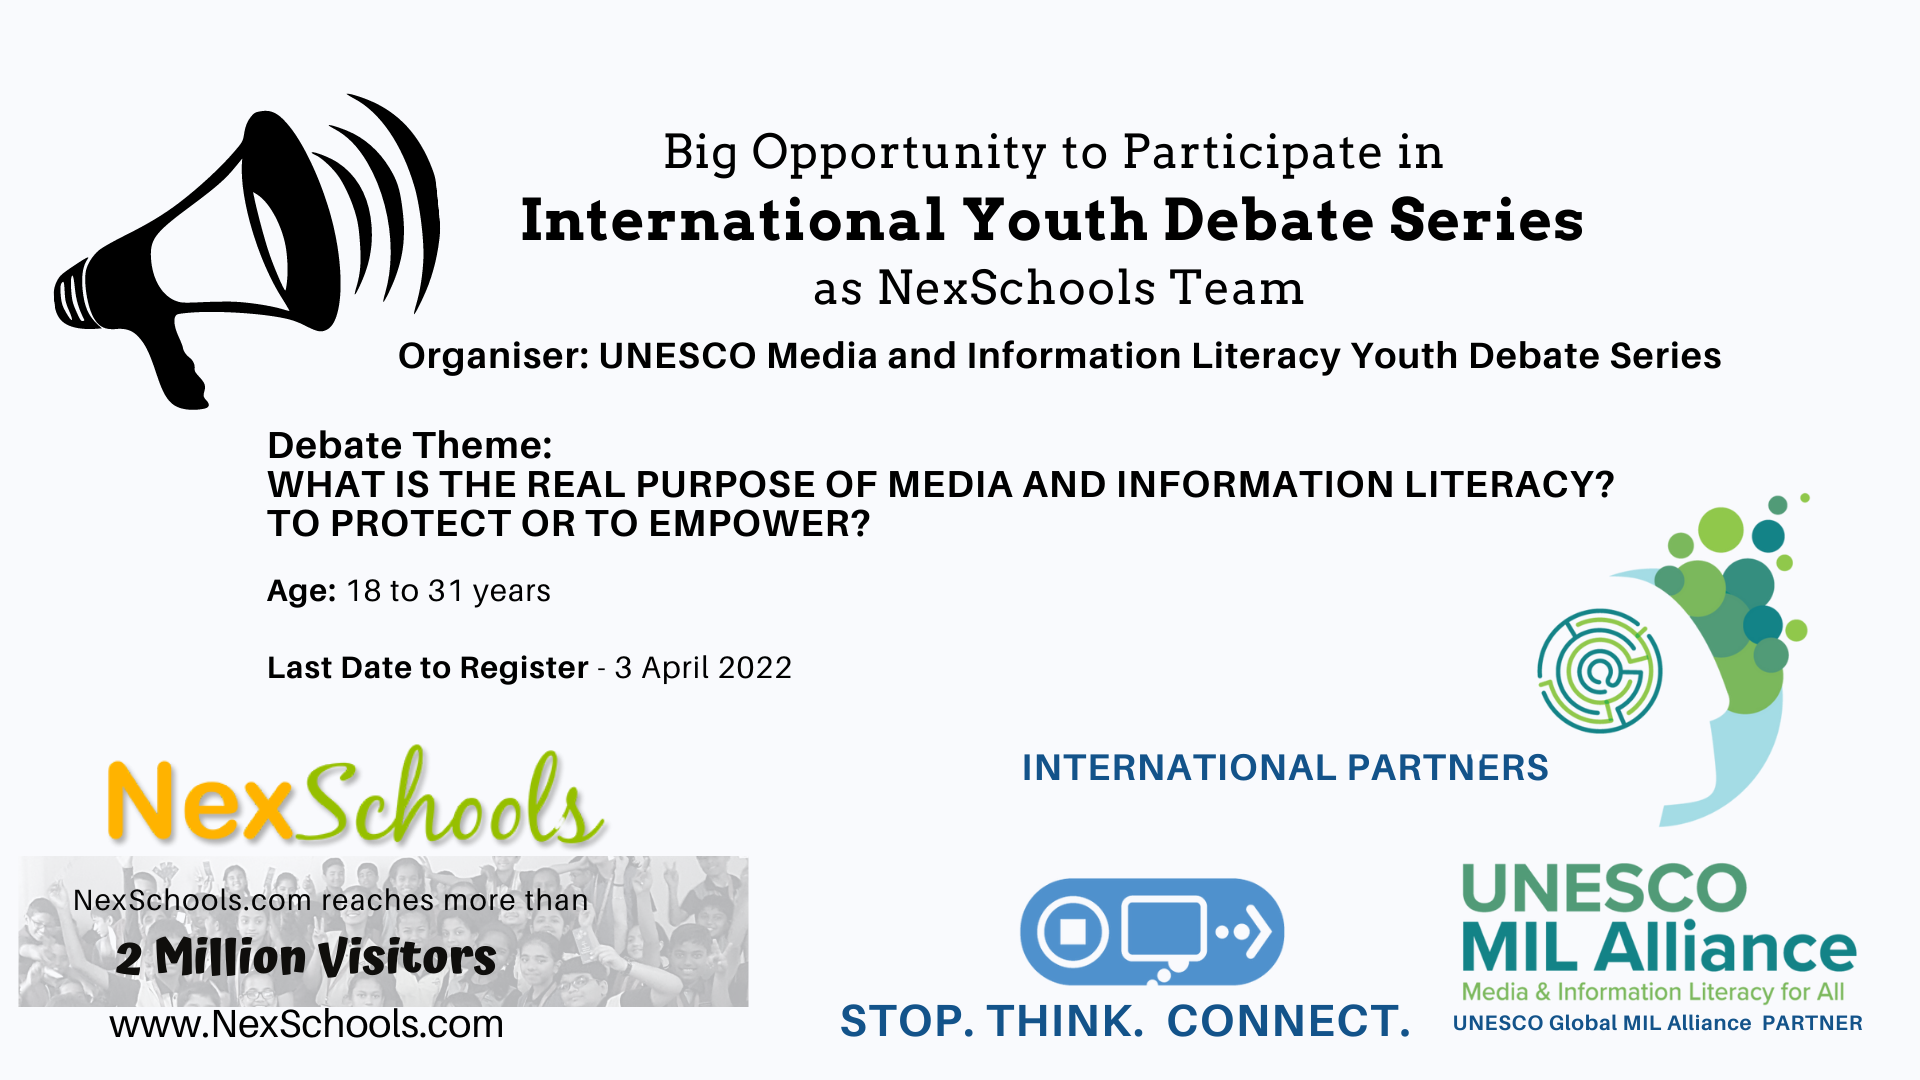 NexSchools International Debate Series, NexSchools Inviting Indian Students, Educators, Youth  ages 18 to 31 years to particiapte in UNESCO Media and Information Literacy is organizing Youth Debate Series  11th of April to the 29th of April 2022   